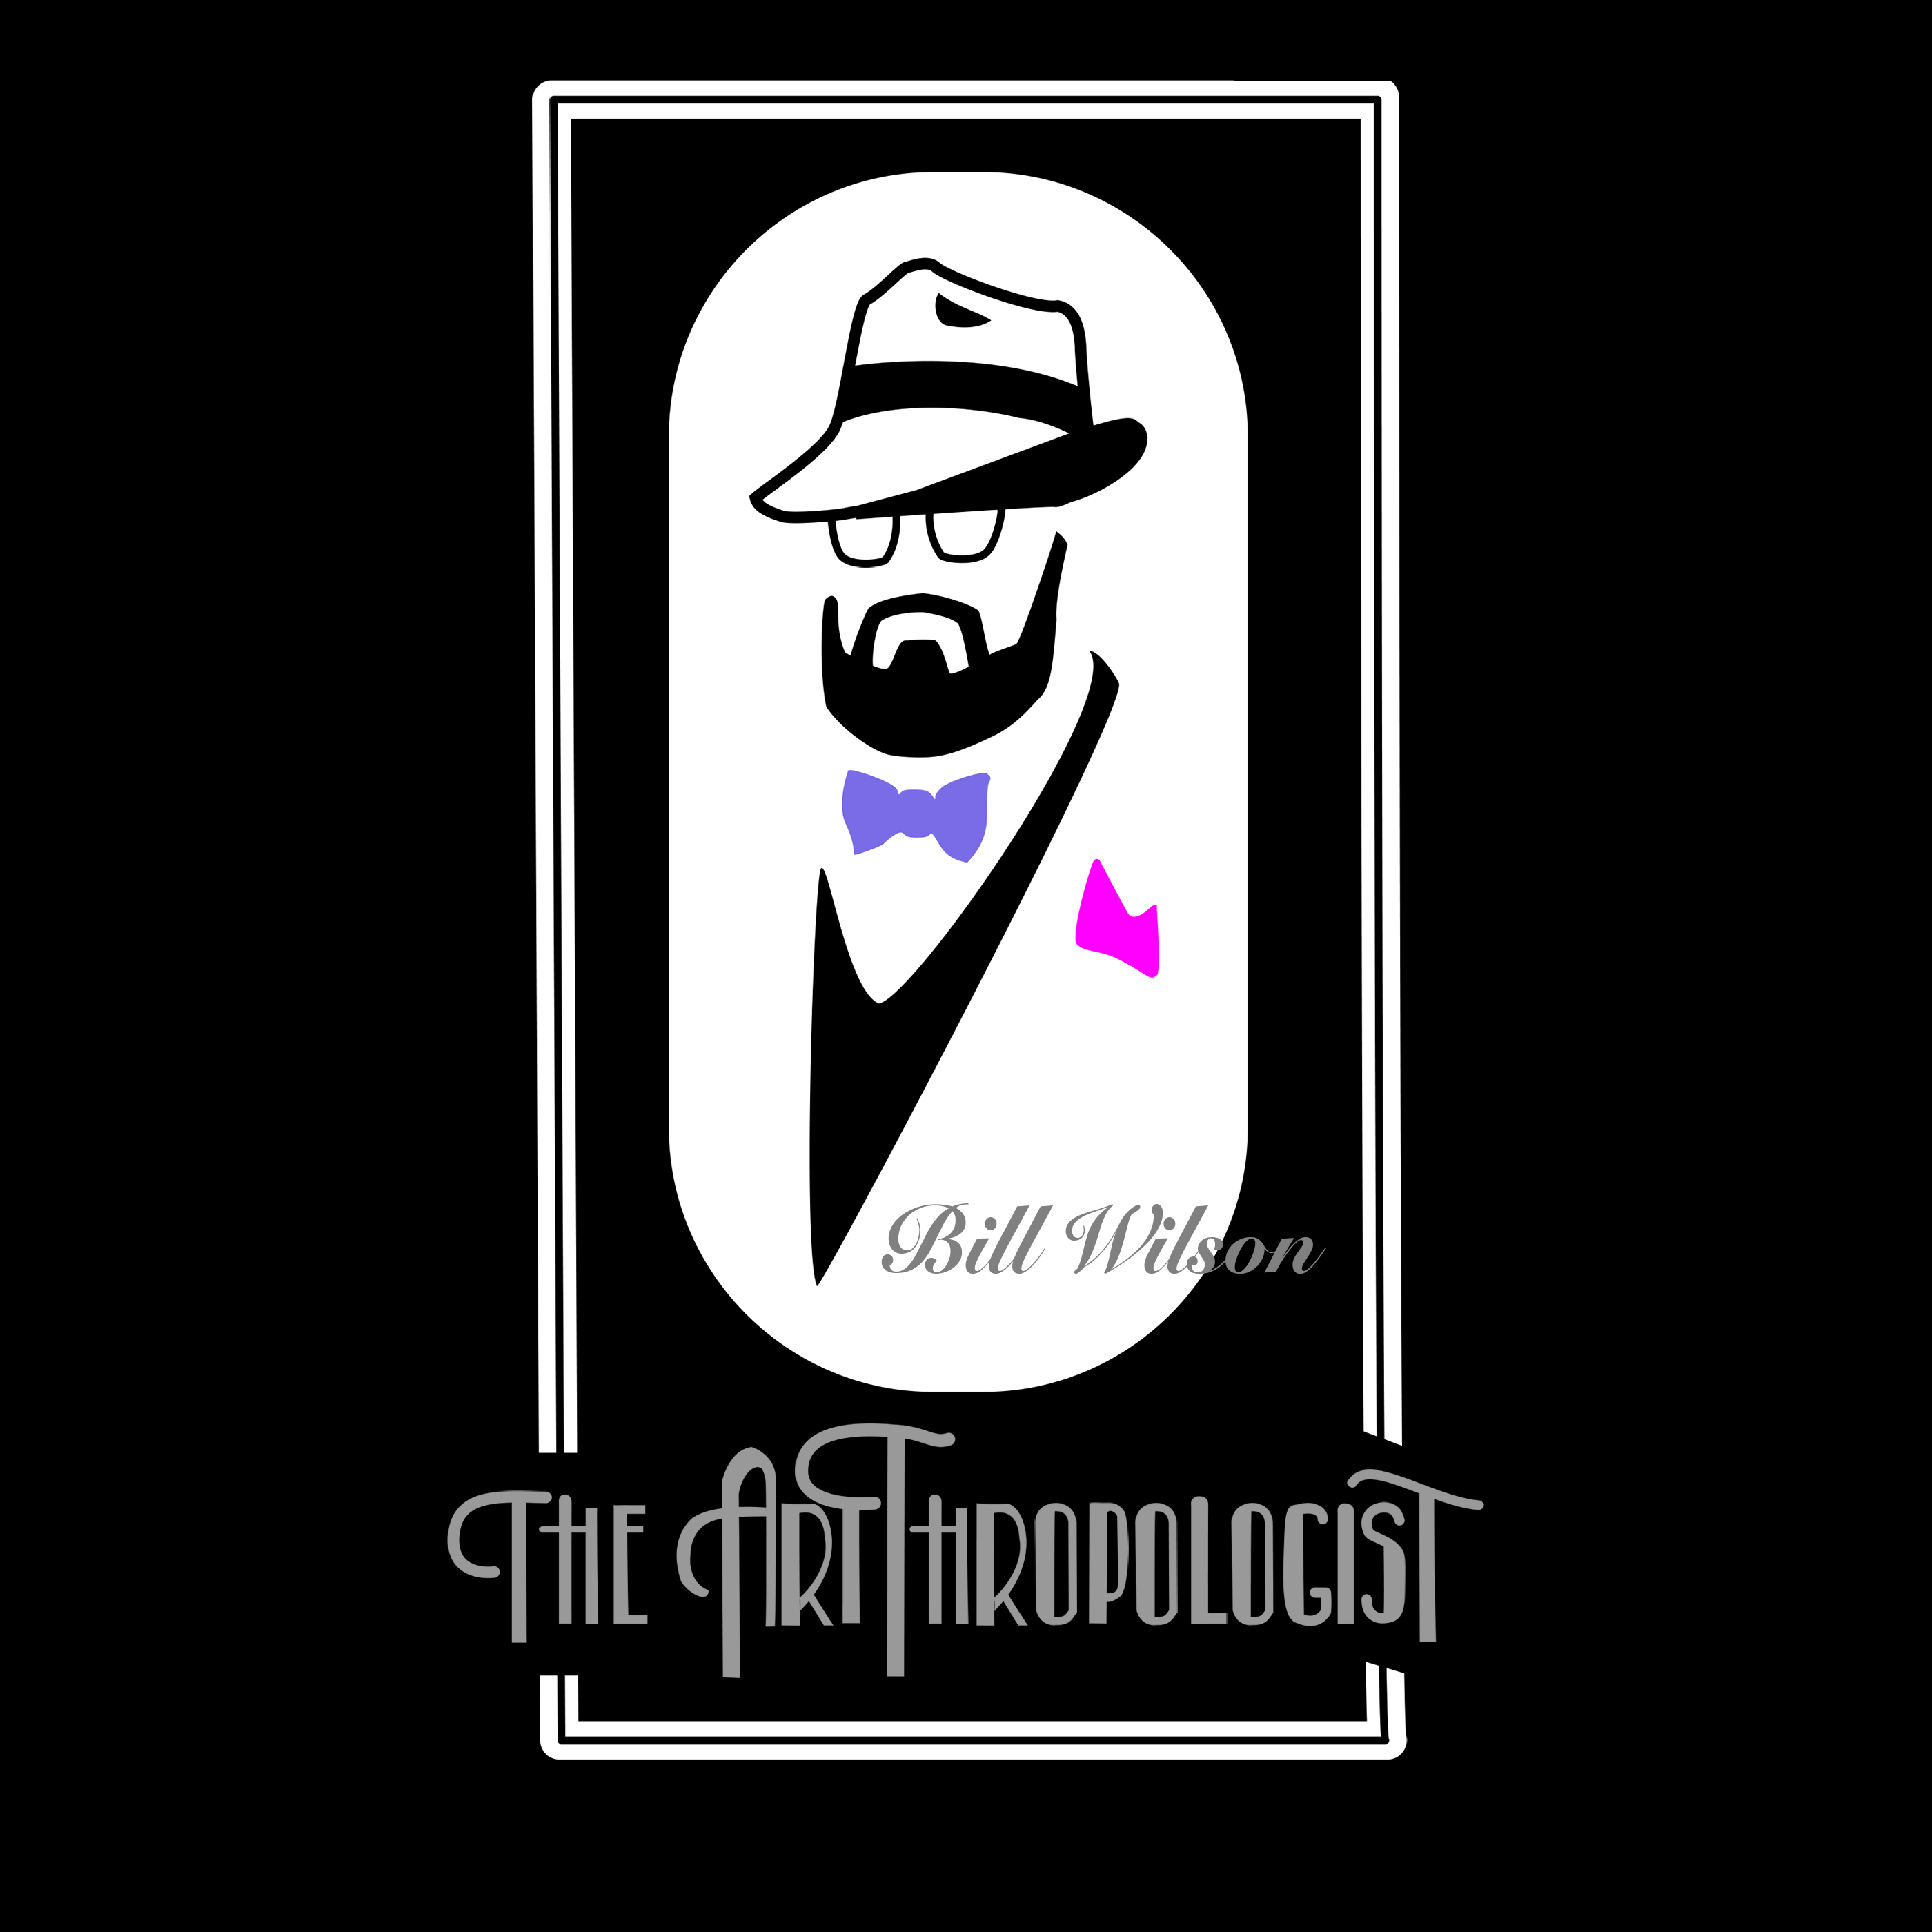 The theartthropologist Podcast